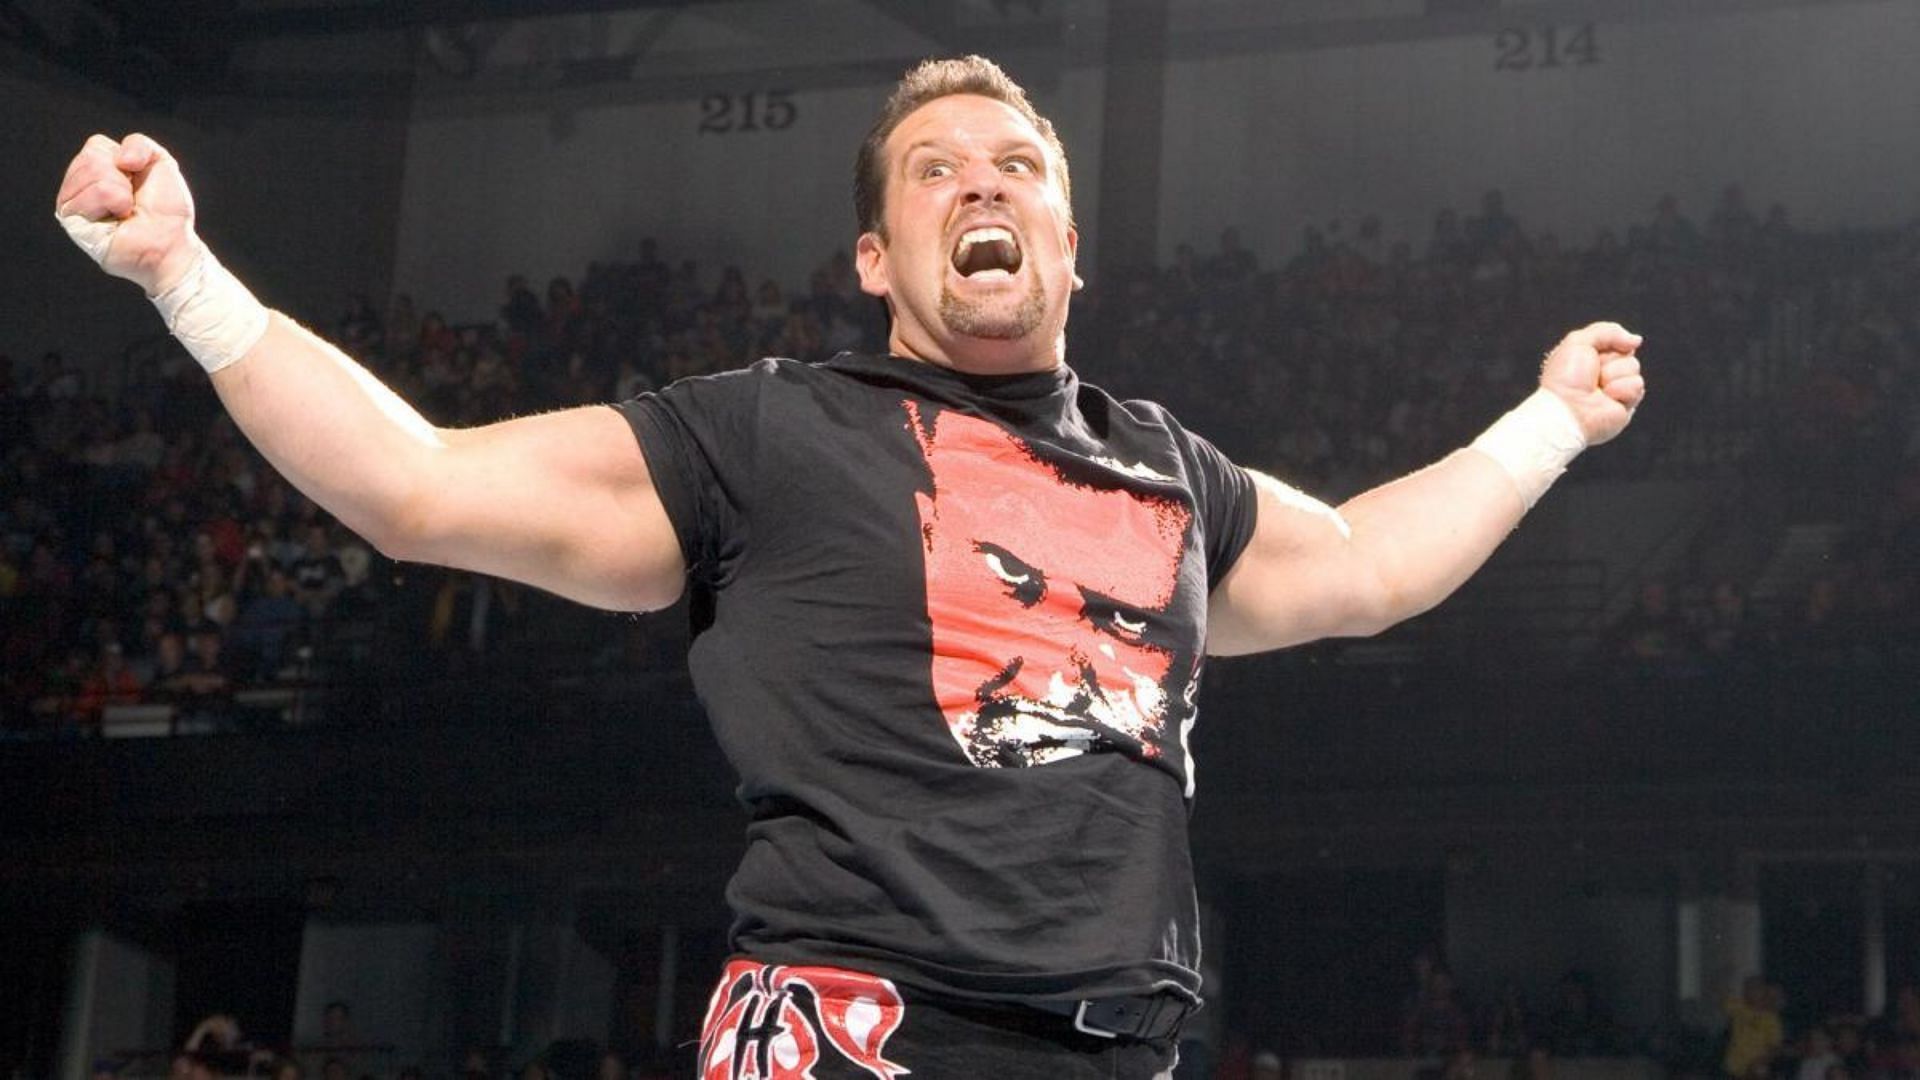 Tommy Dreamer performing at a WWE event